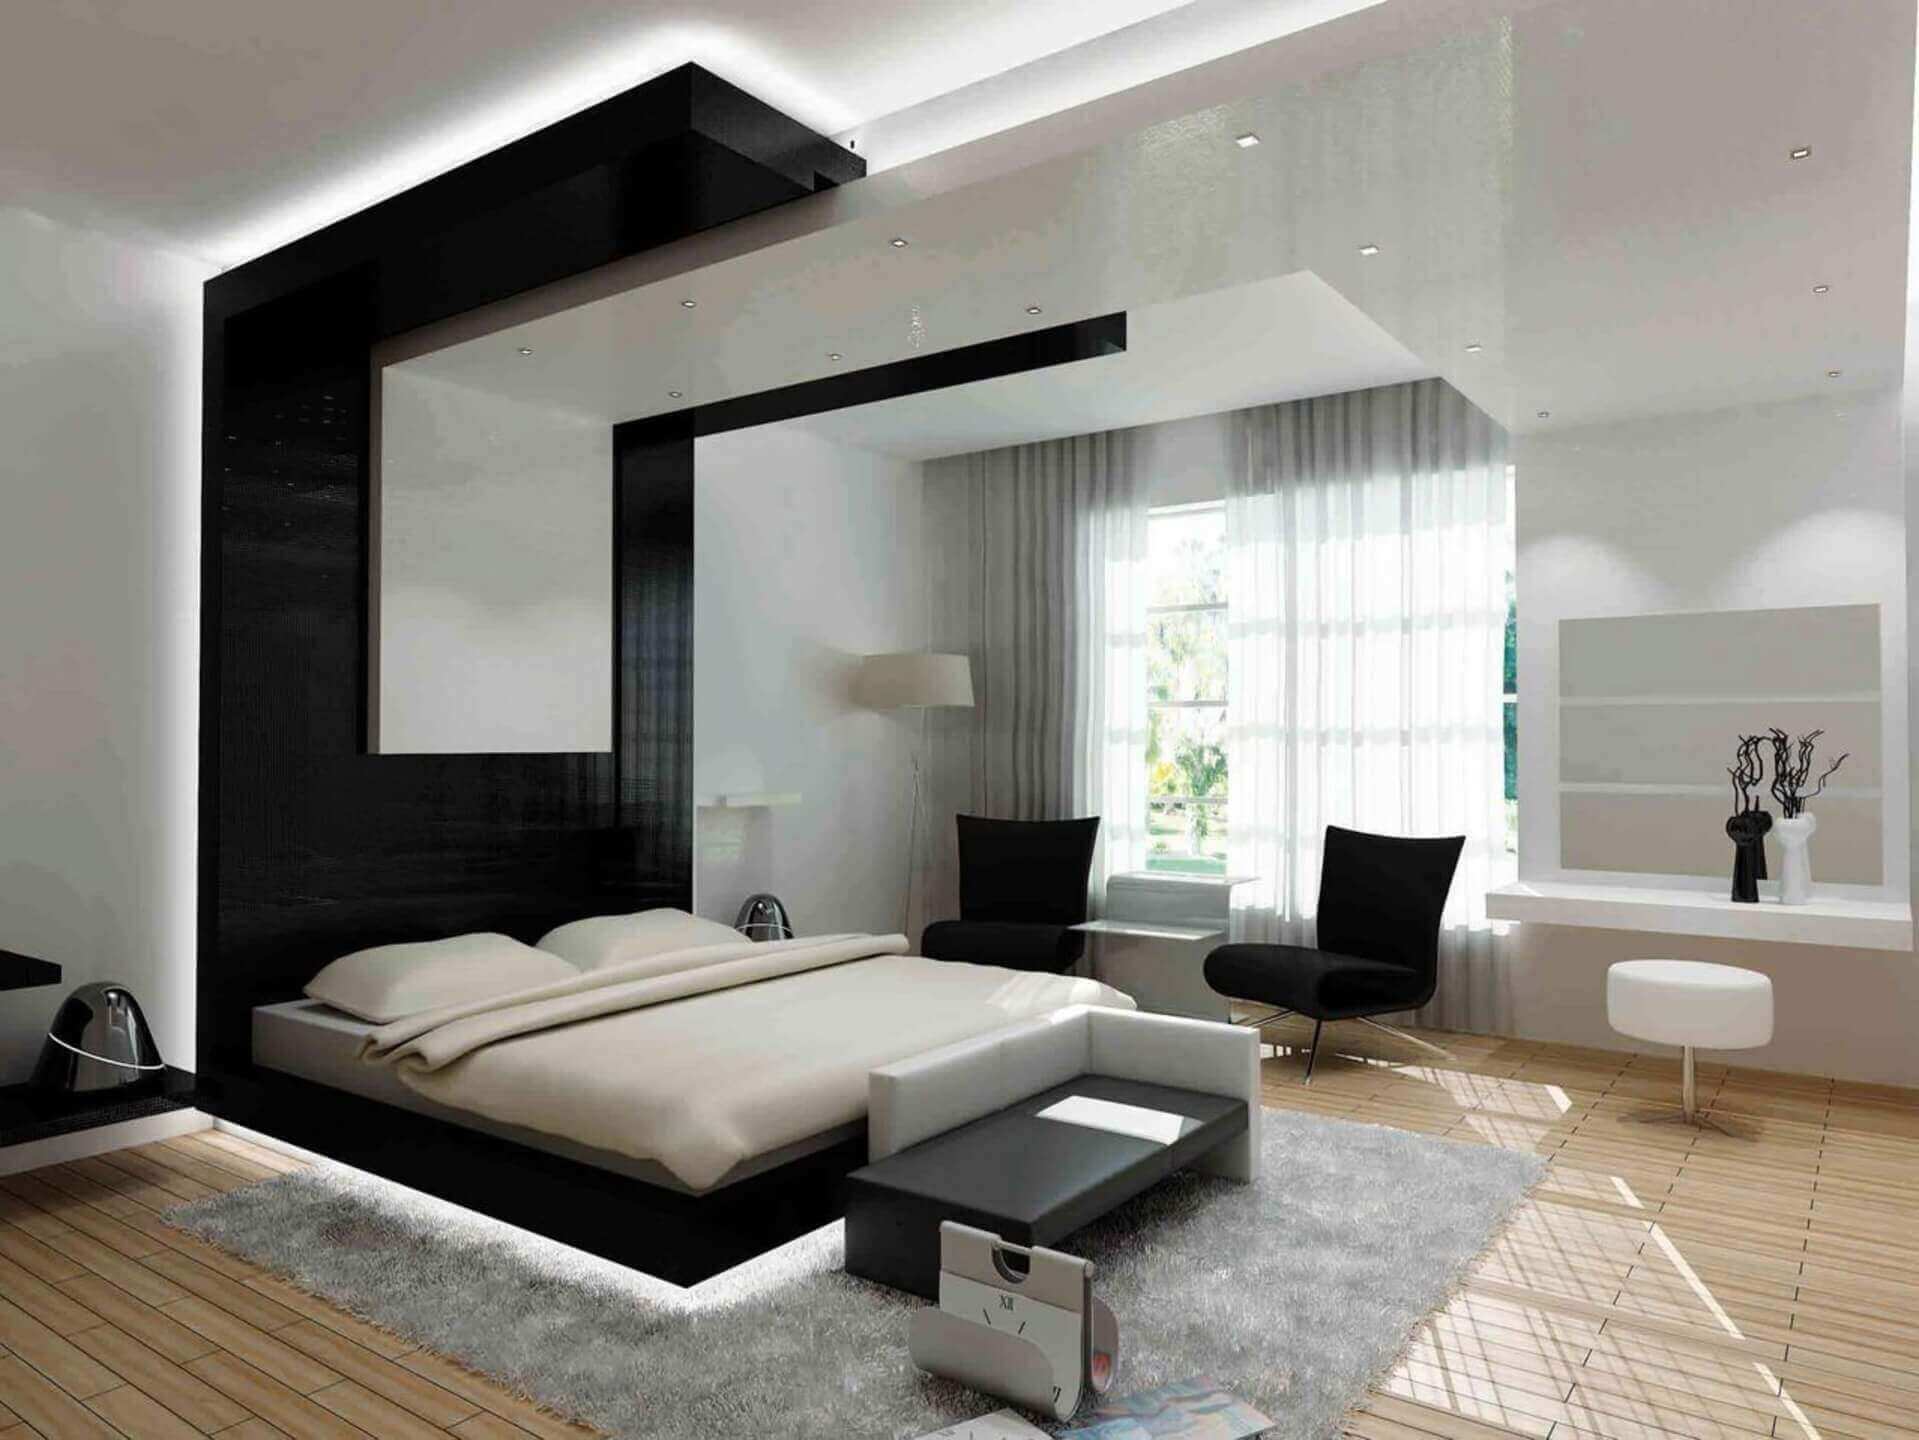 23.bedroom Designs For Couples 